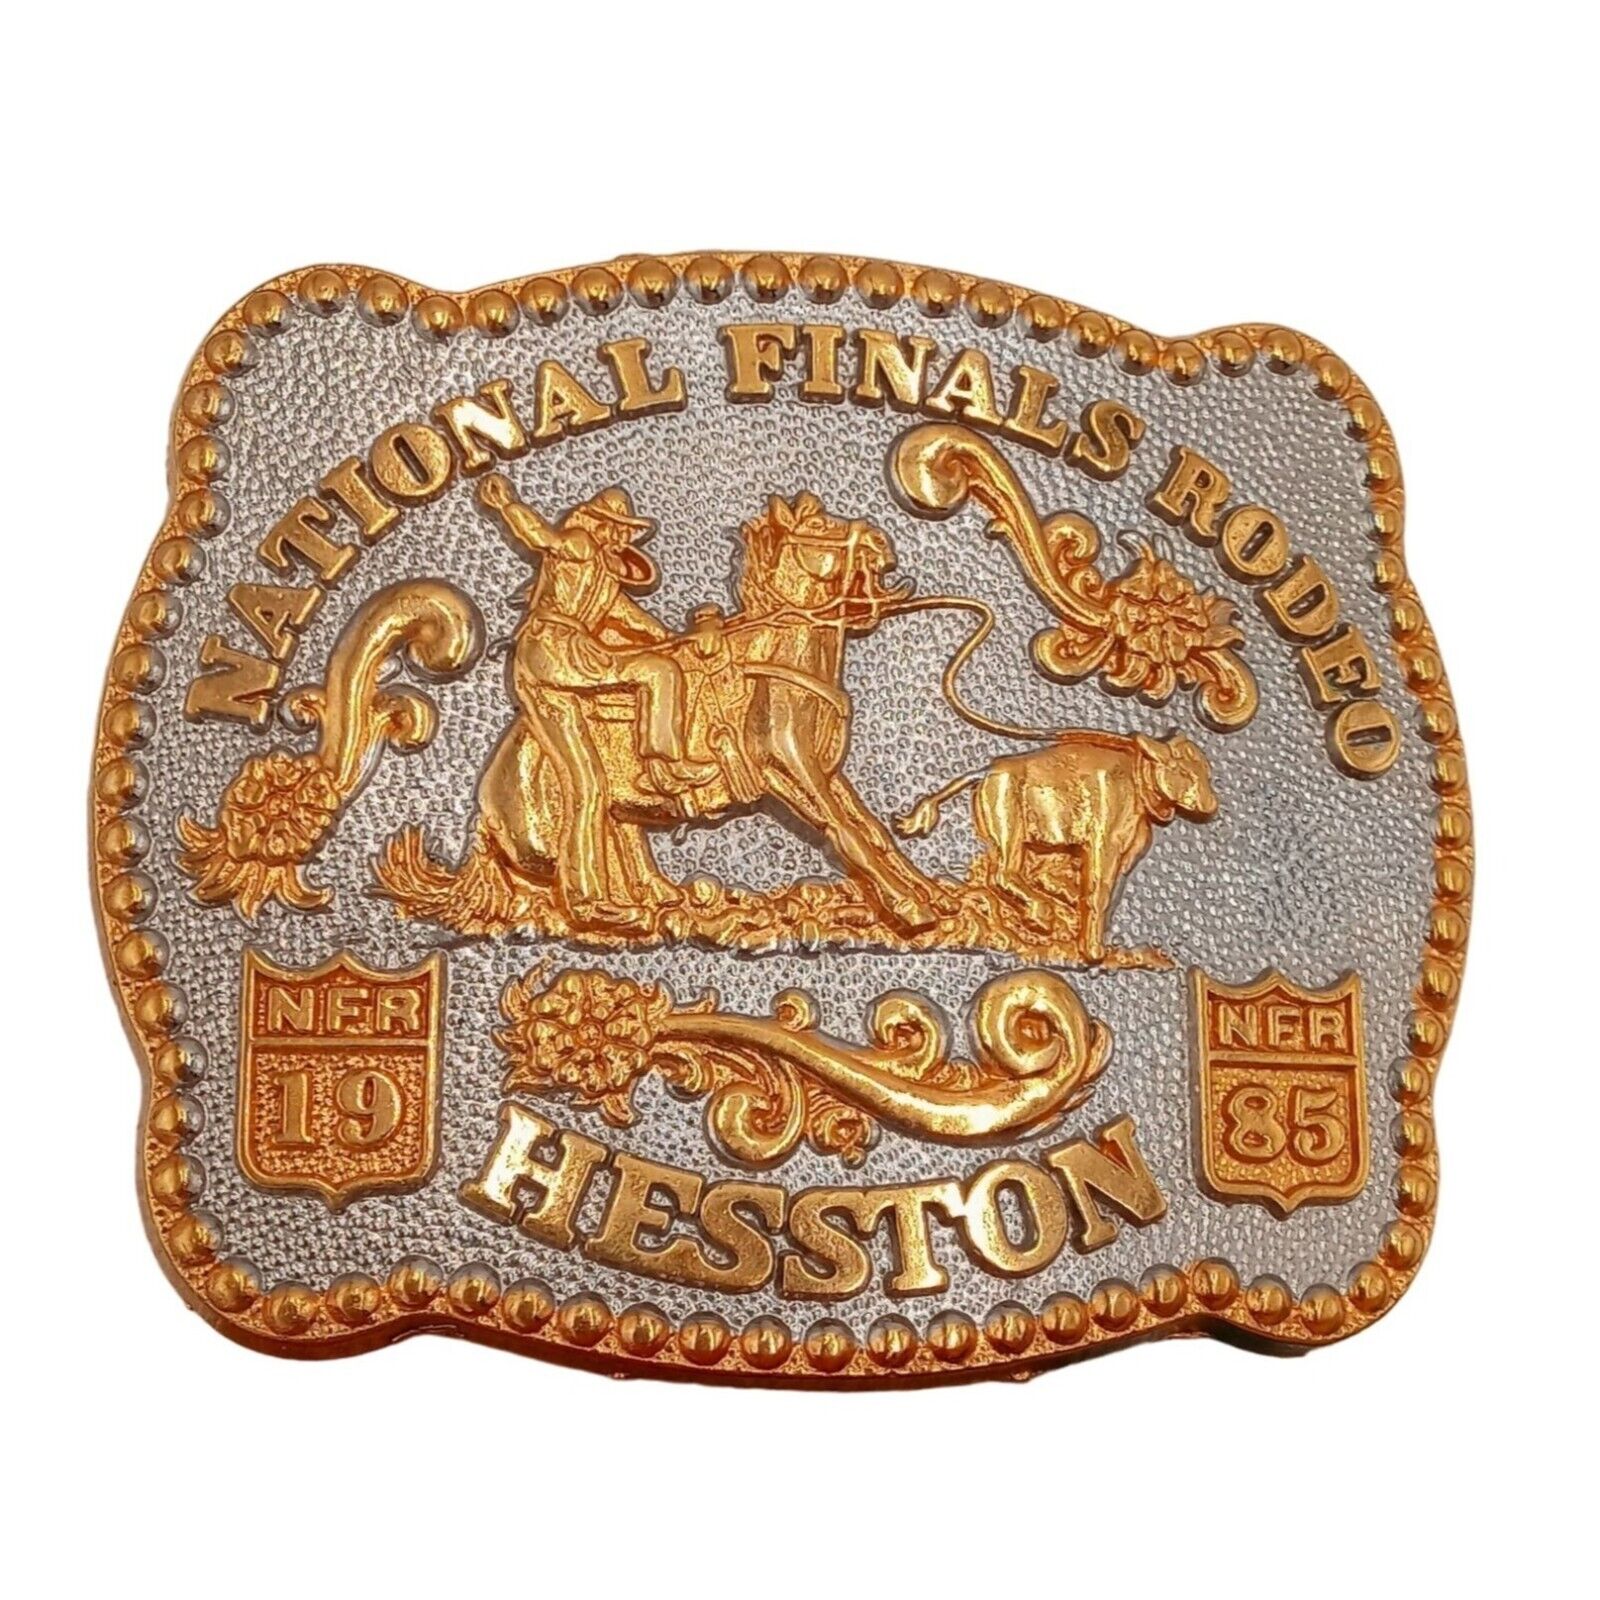 1985 Hesston Rodeo Belt Buckle Limited Edition Youth Calf Roping Kids National F